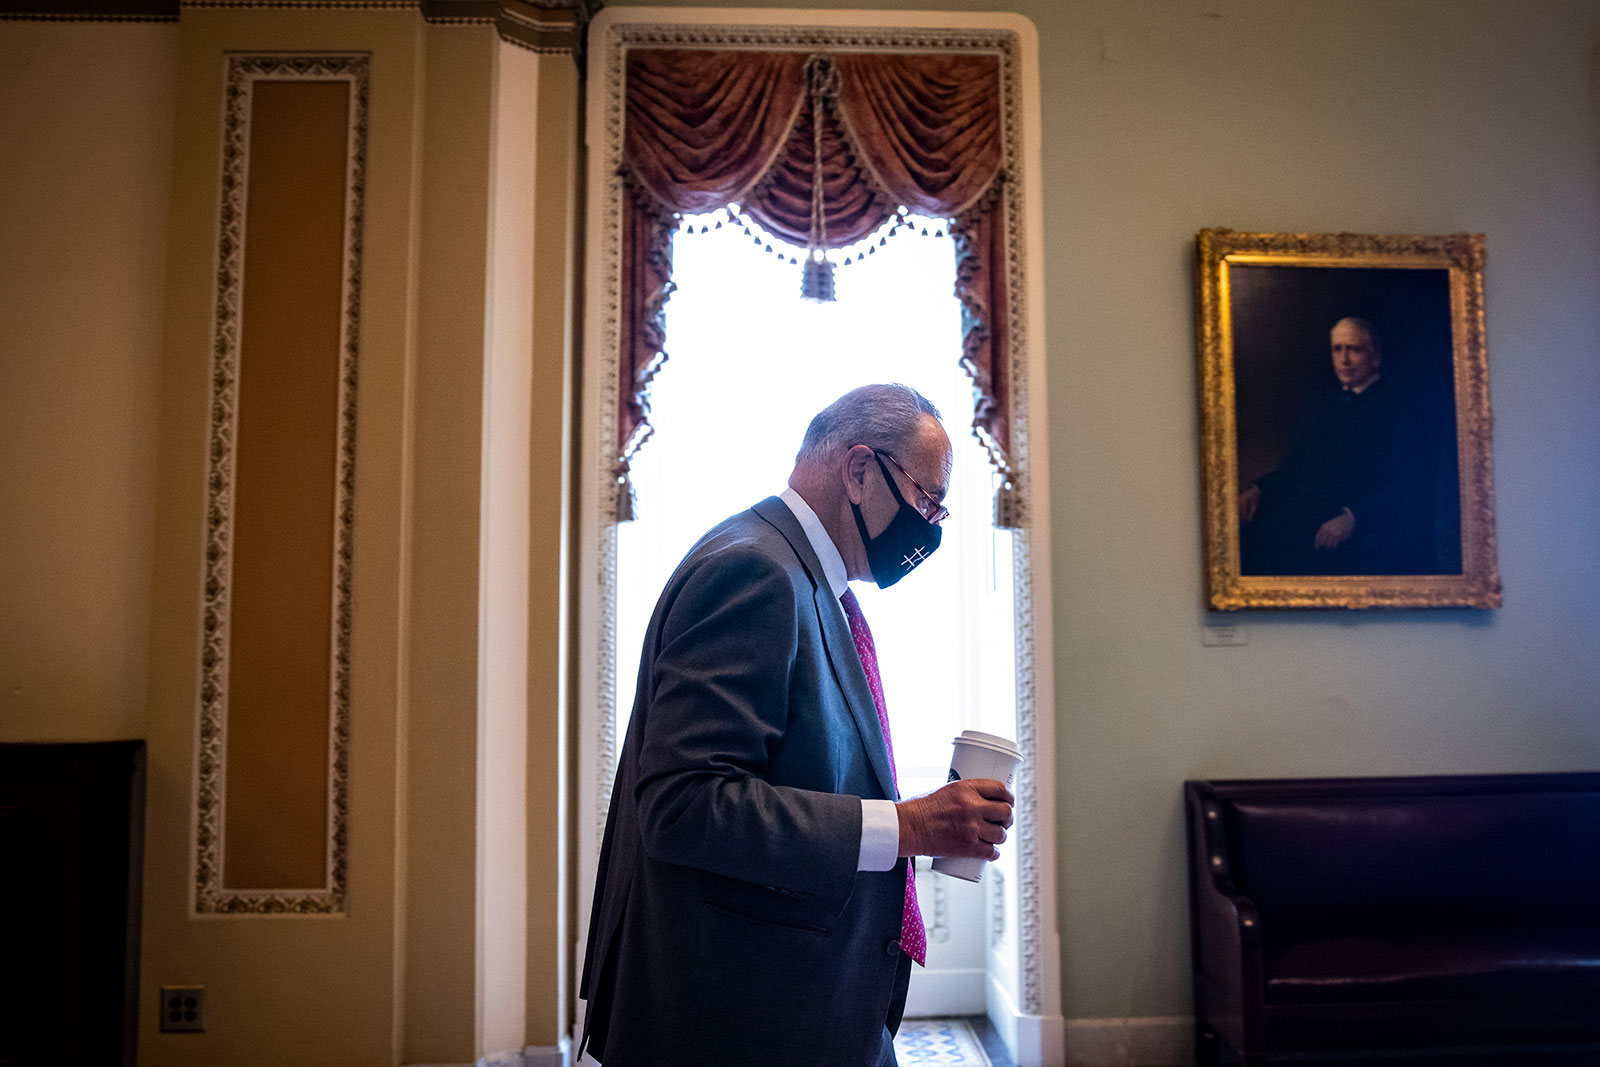 Senate Majority Leader Chuck Schumer heads to his office in the US Capitol on August 10.